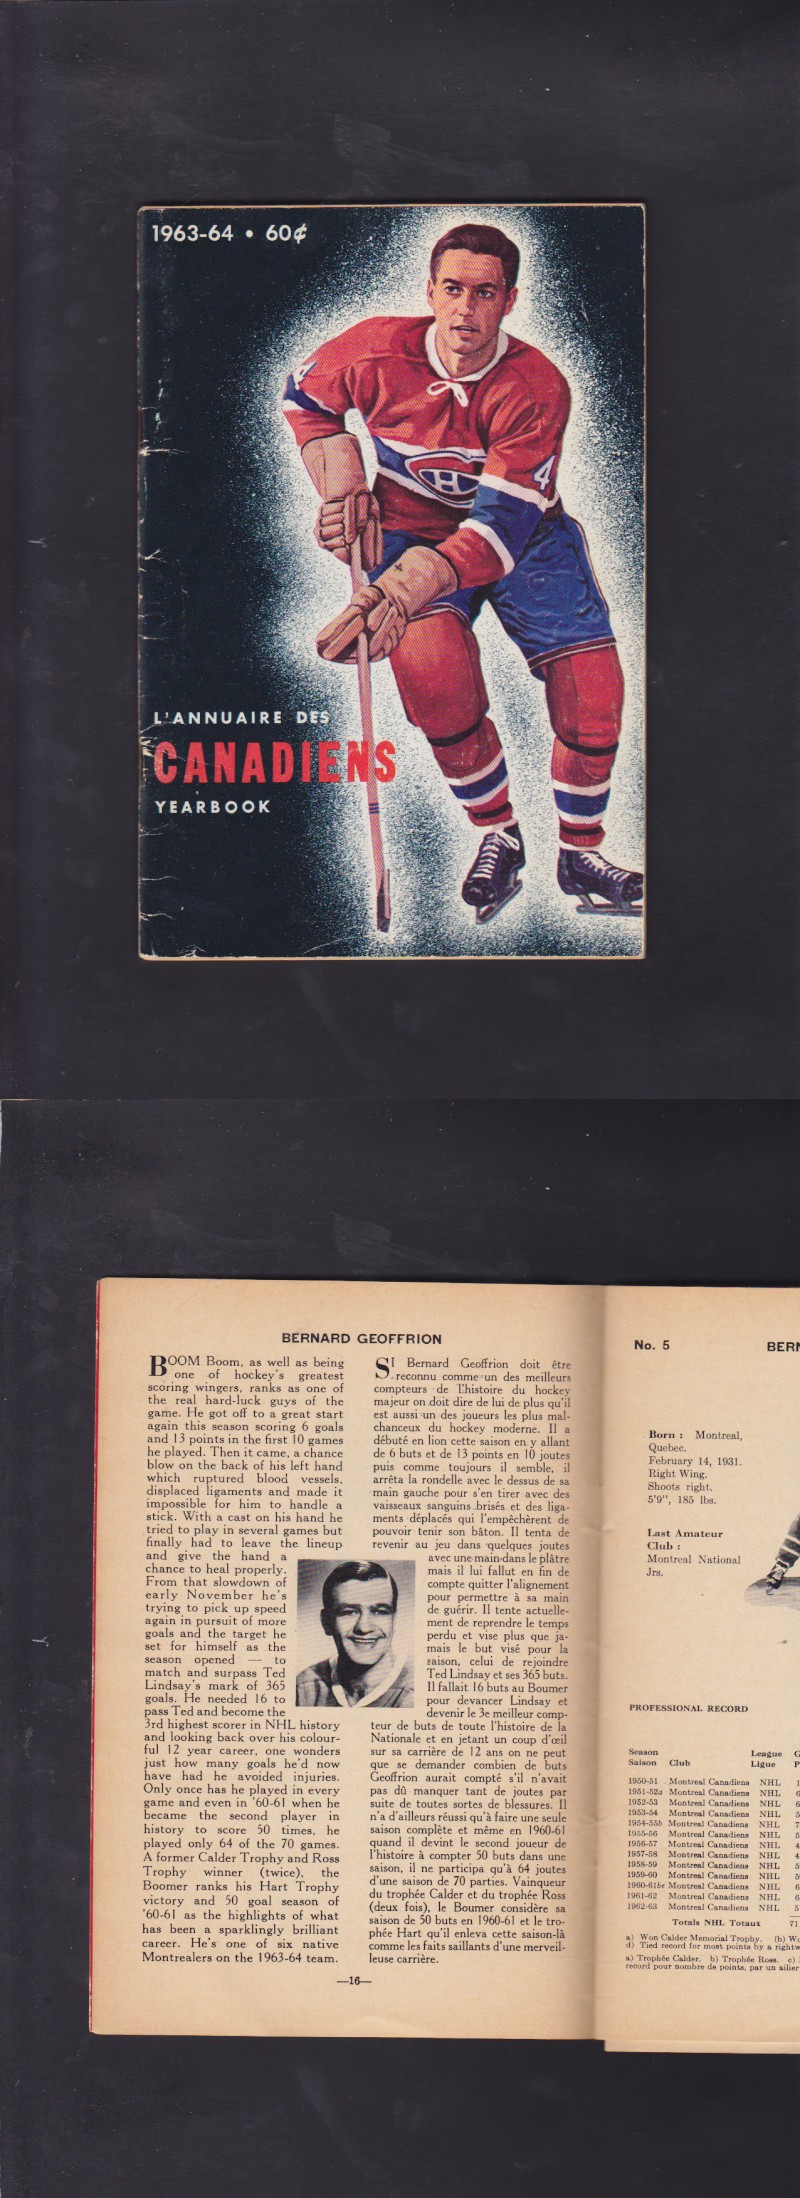 1963-64 MONTREAL CANADIENS YEARBOOK photo